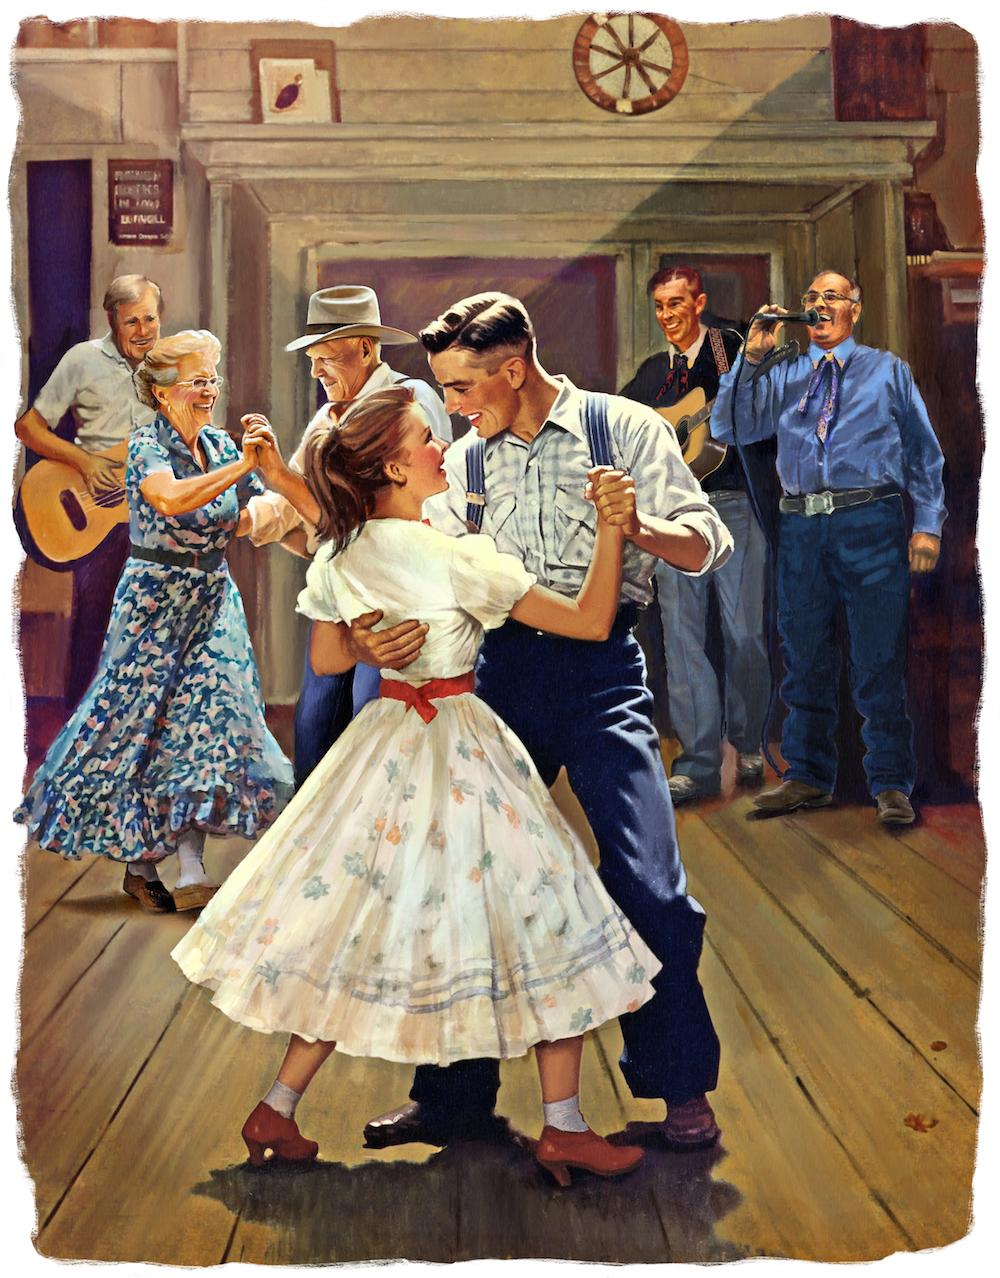 Square dancing is a facet of American culture that's enjoyable for the whole community. (Biba Kayewich)